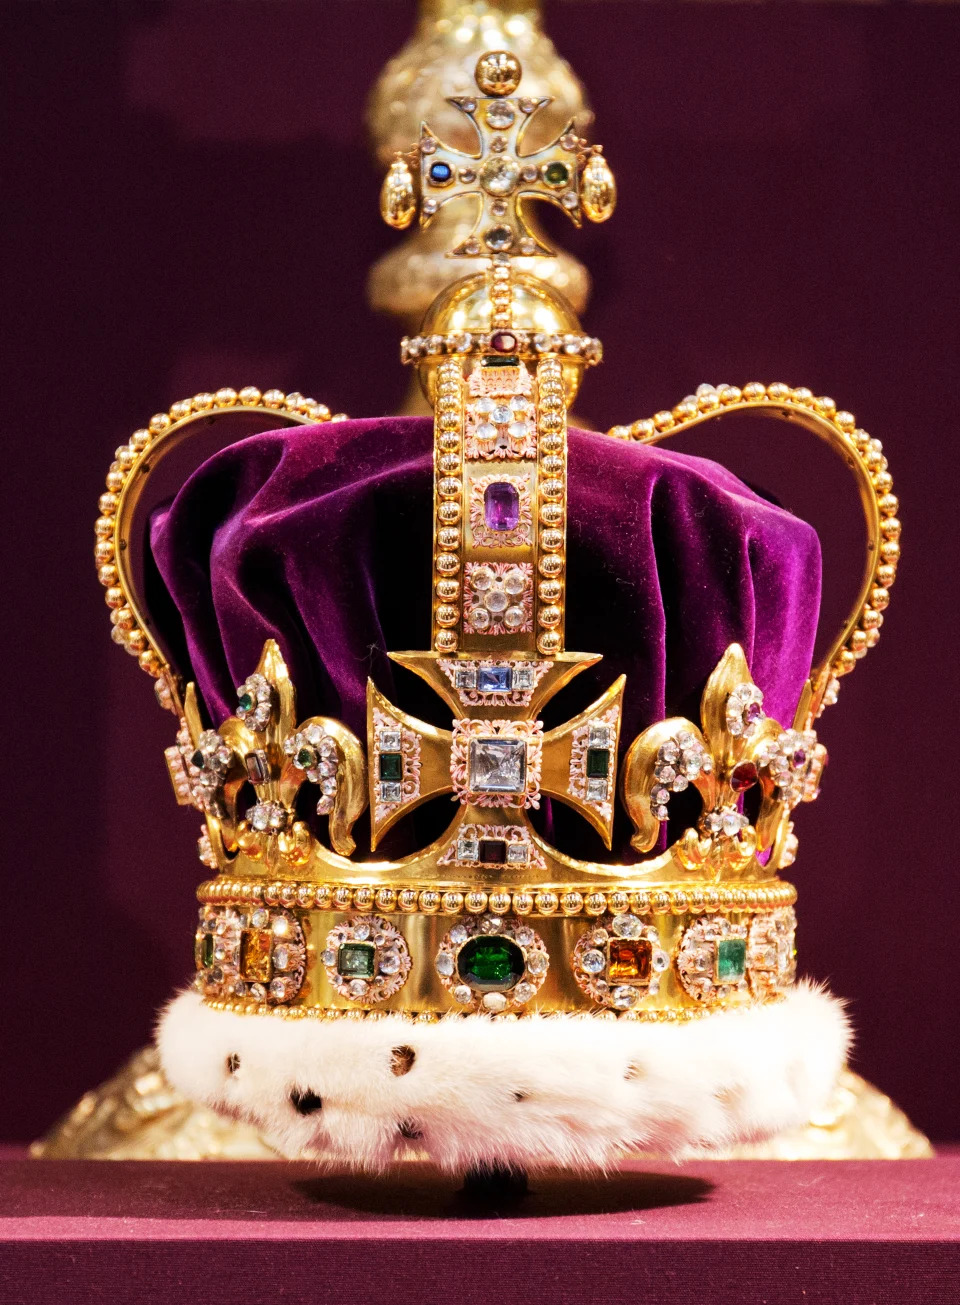 A picture shows St Edward's Crown, the crown used in coronations for English and later British monarchs, and one of the senior Crown Jewels of Britain, during a service to celebrate the 60th anniversary of the coronation of Queen Elizabeth II at Westminster Abbey in London on June 4, 2013.  Queen Elizabeth II marked the 60th anniversary of her coronation with a service at Westminster Abbey filled with references to the rainy day in 1953 when she was crowned.  AFP PHOTO / POOL / JACK HILL (Photo by JACK HILL / POOL / AFP) (Photo by JACK HILL/POOL/AFP via Getty Images)